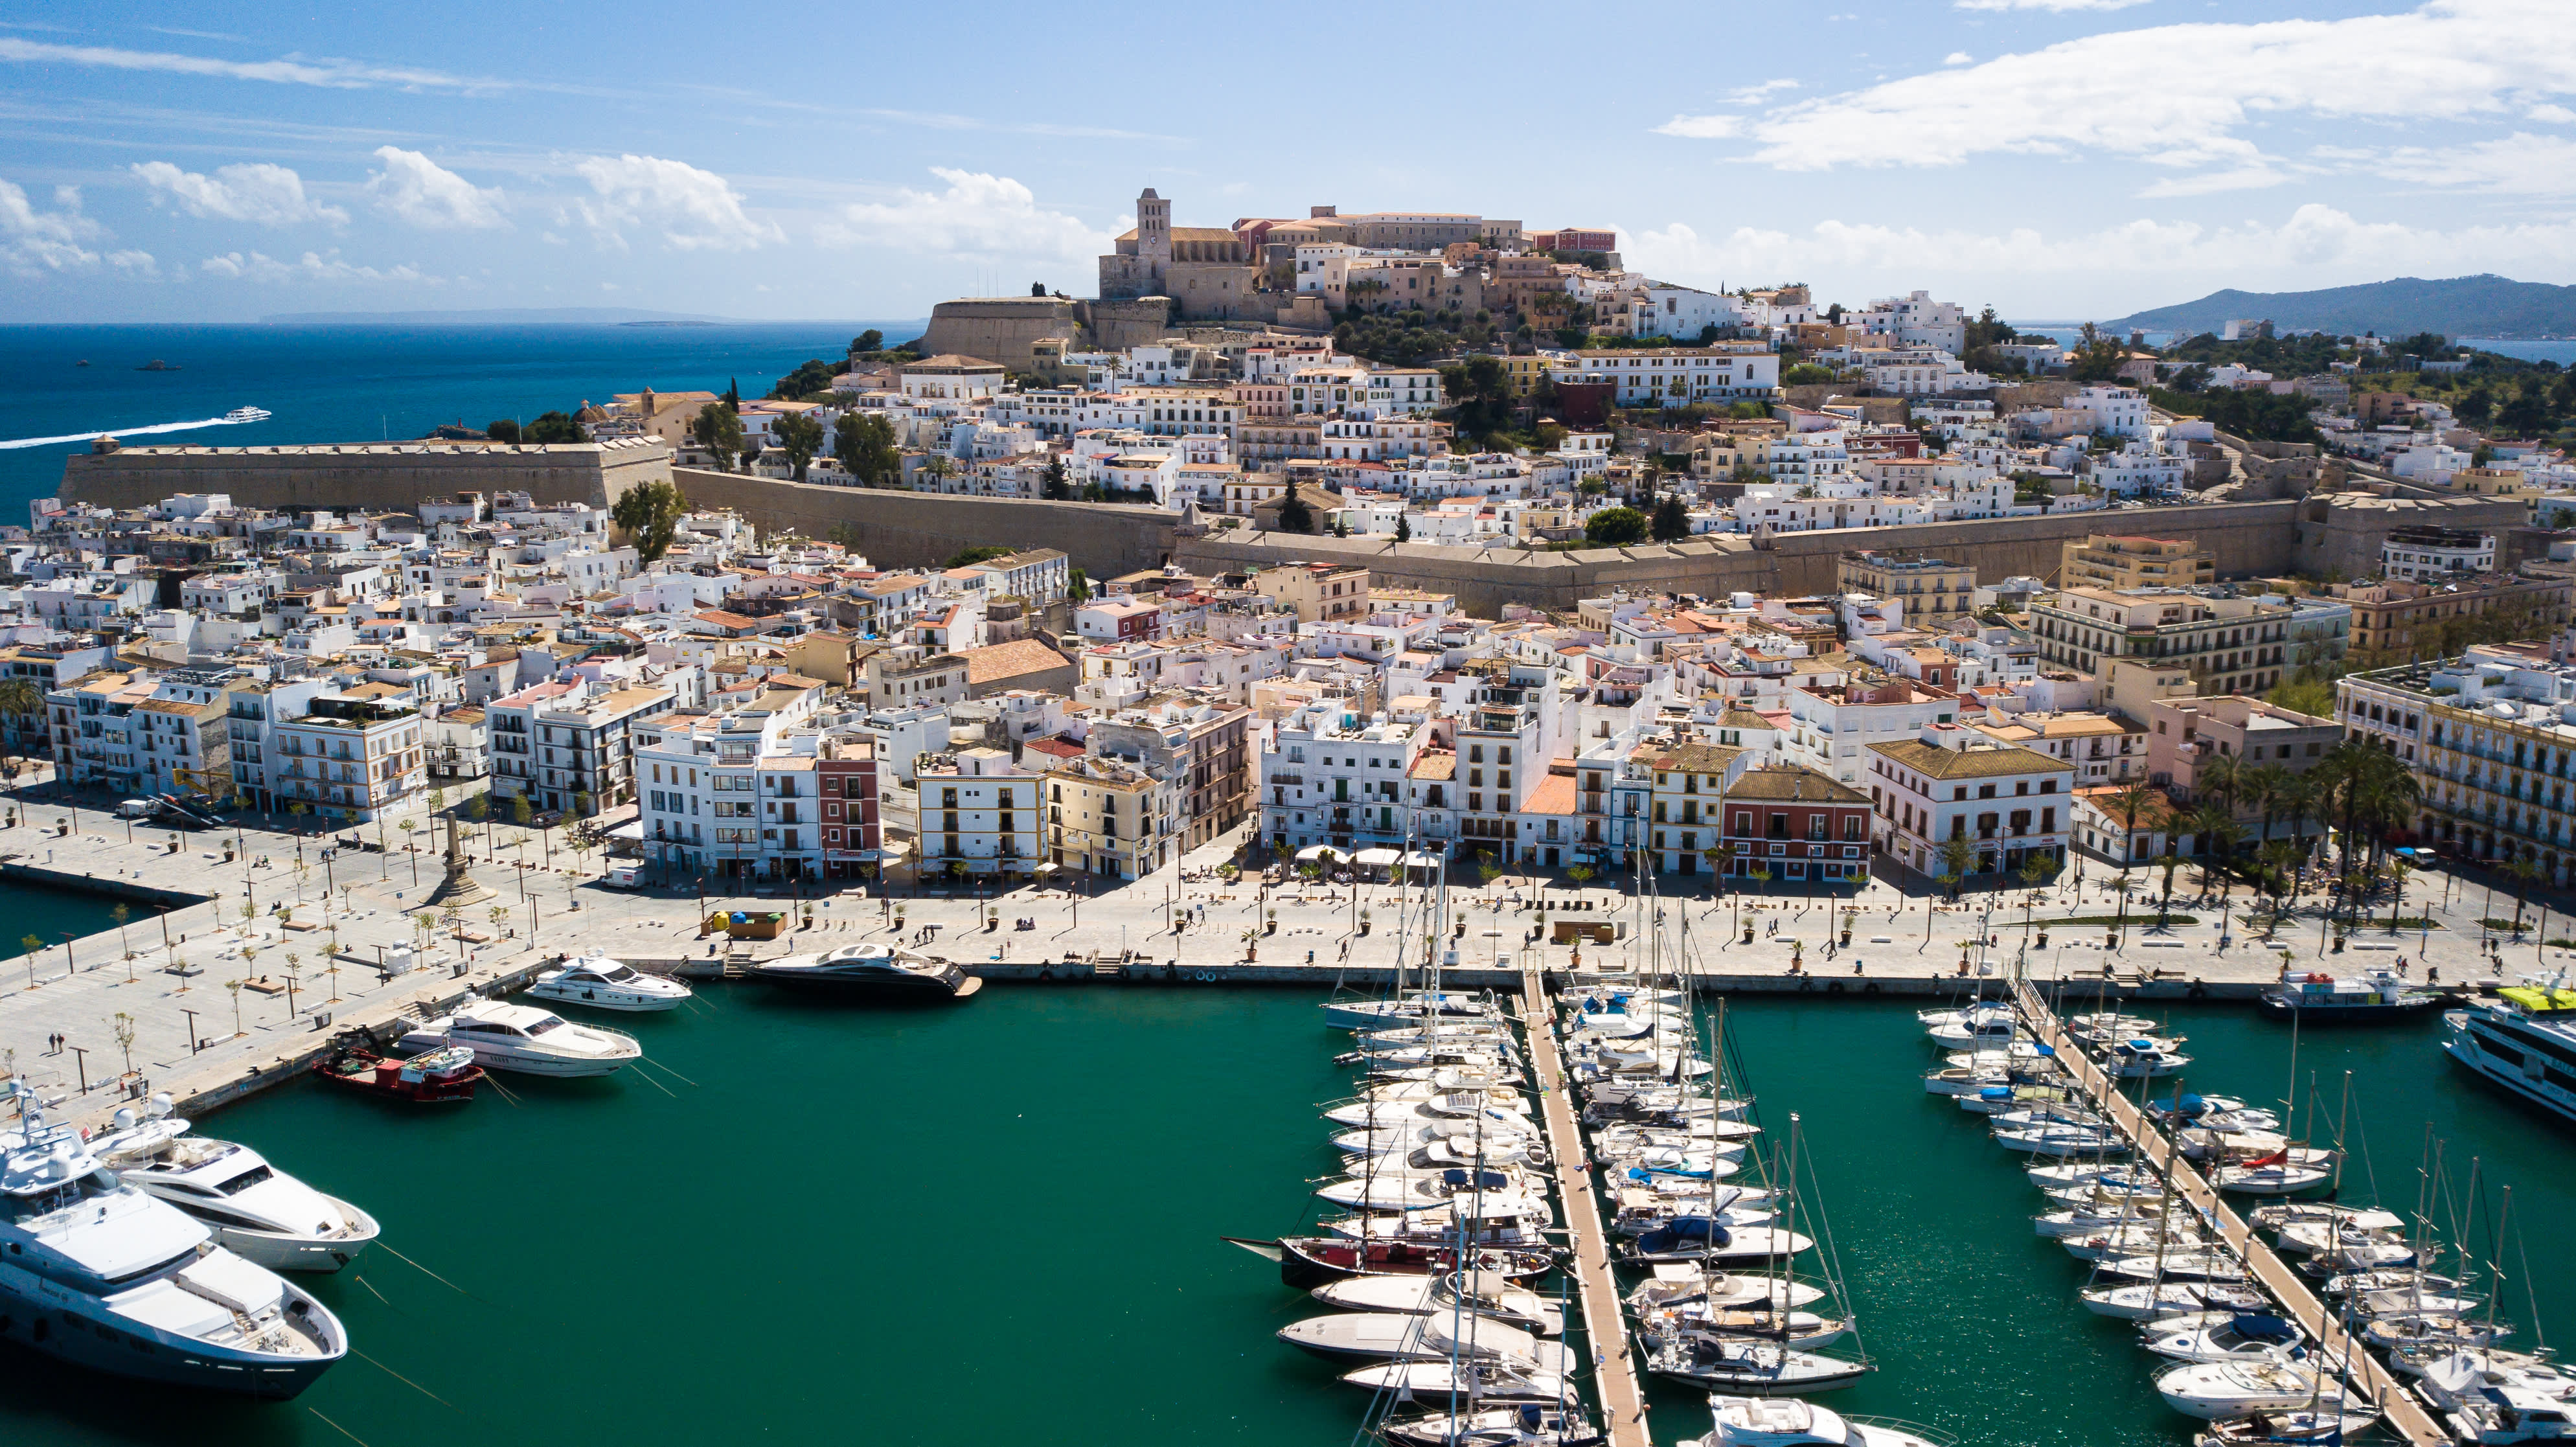 Is Ibiza expensive? Prices for rooms, food and taxis are rising